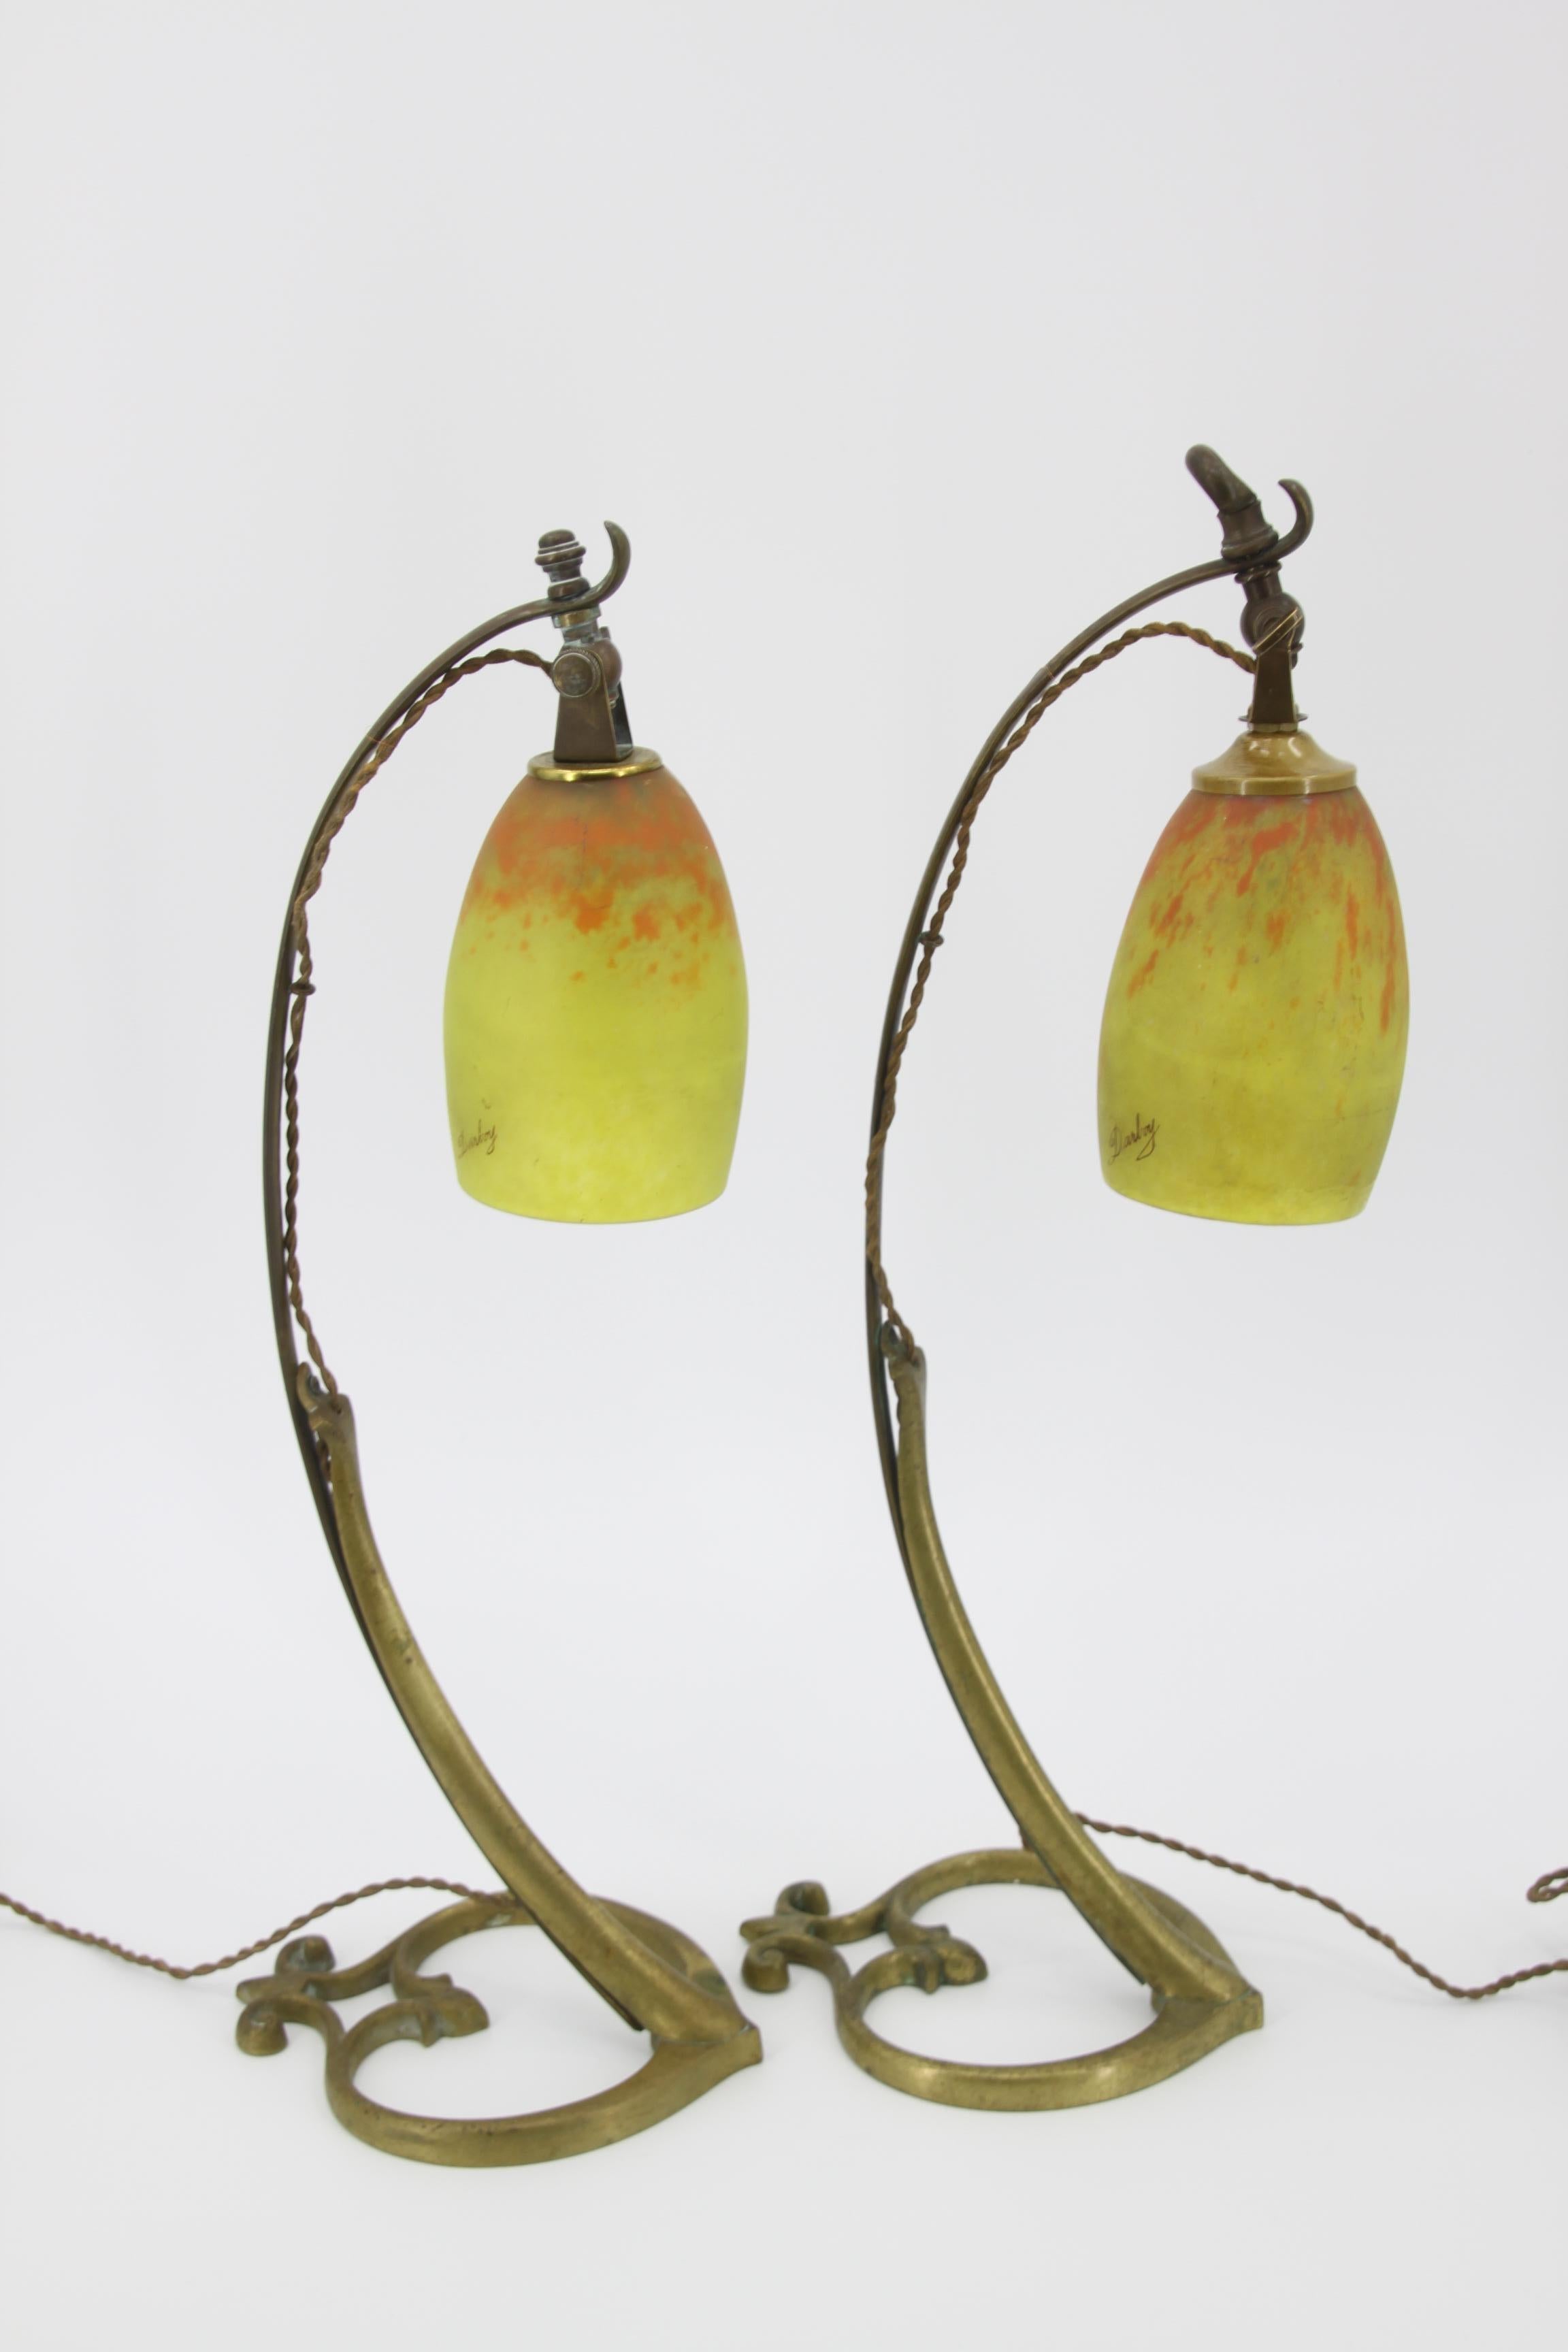 French Muller Frères “Darboy” Set of 2 Bronze and Glass Table Lamps, Art Nouveau